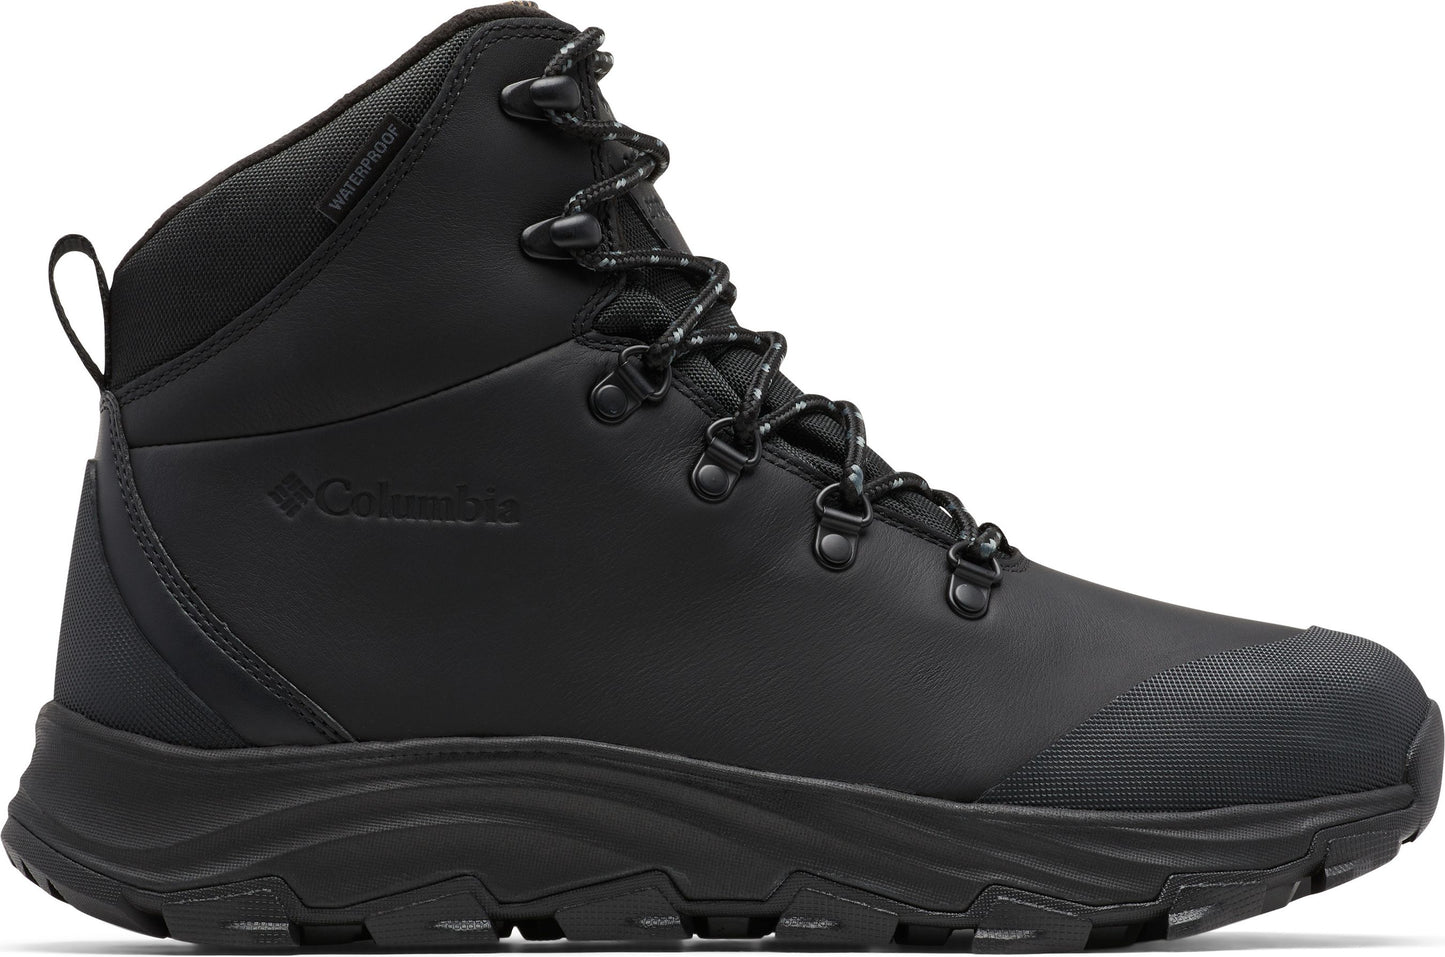 Columbia Boots Expeditionist Boot Black